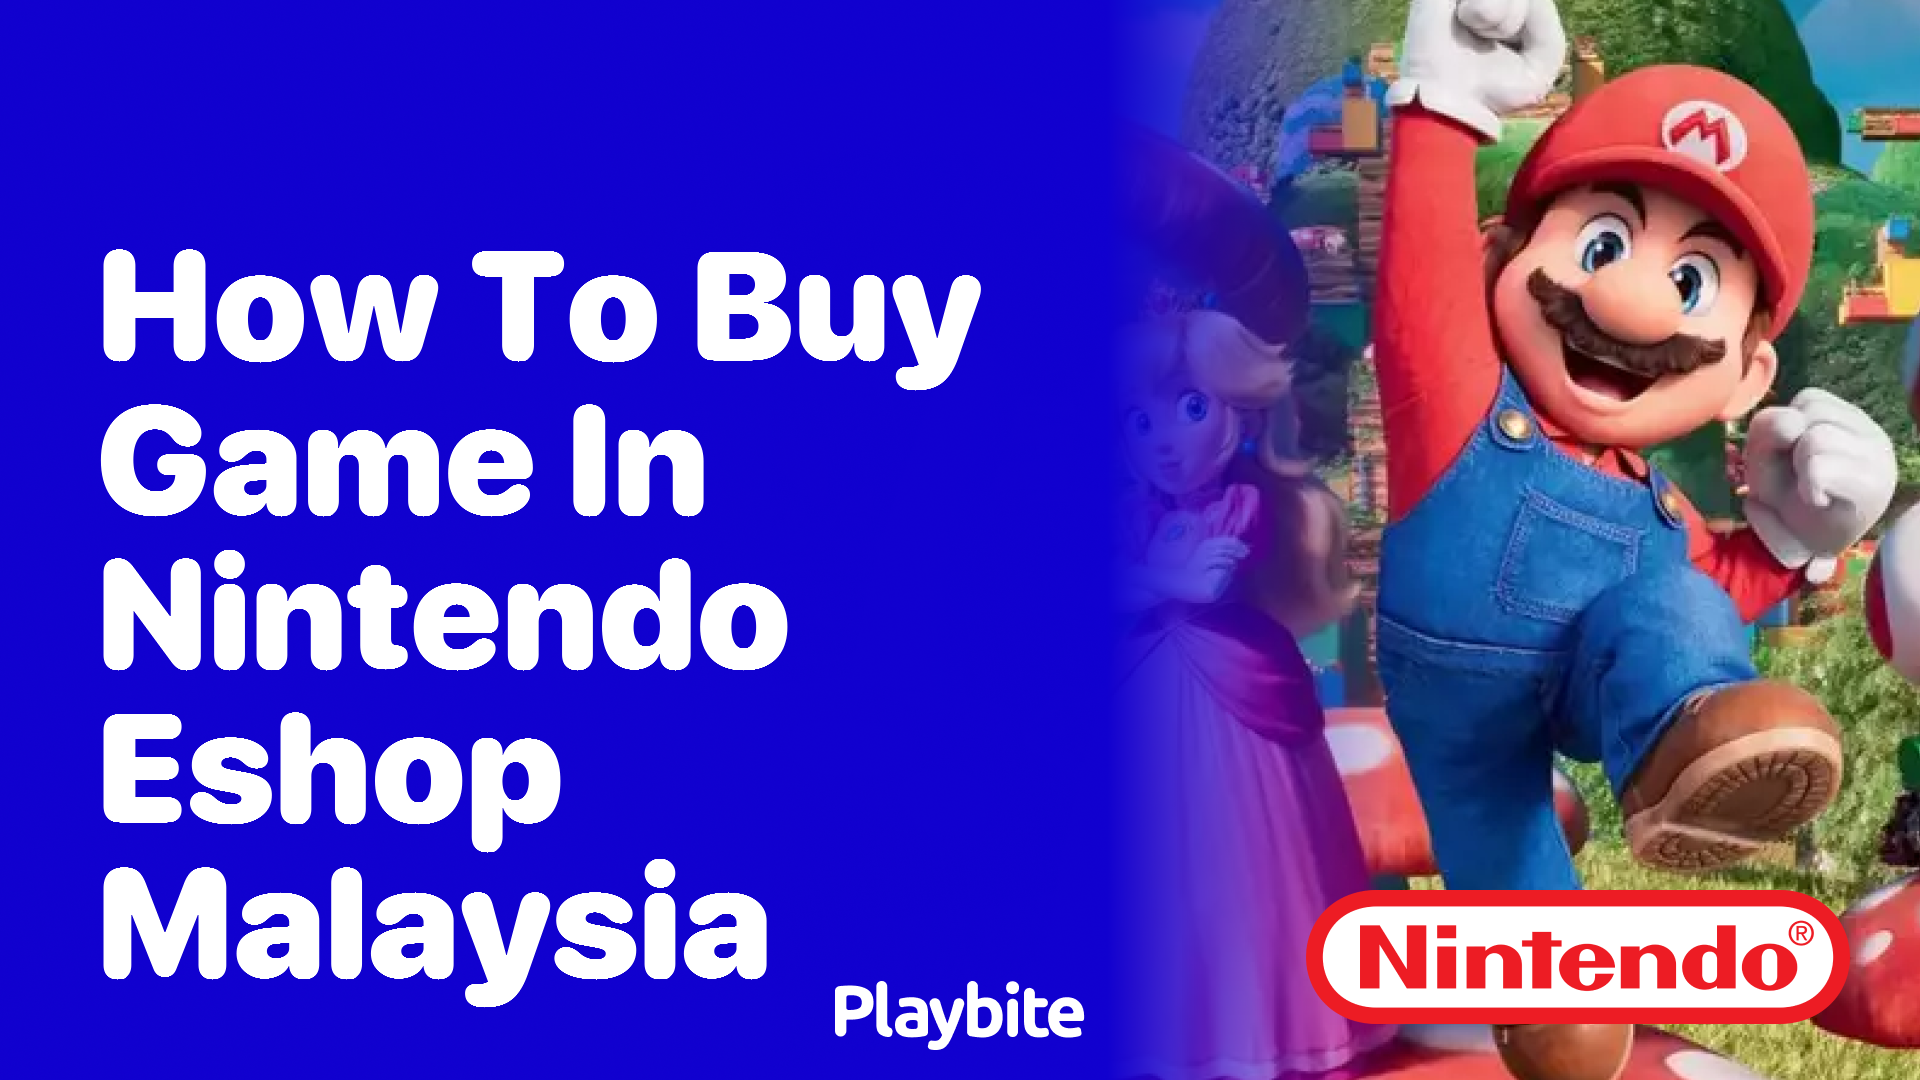 How to Buy a Game in Nintendo eShop Malaysia